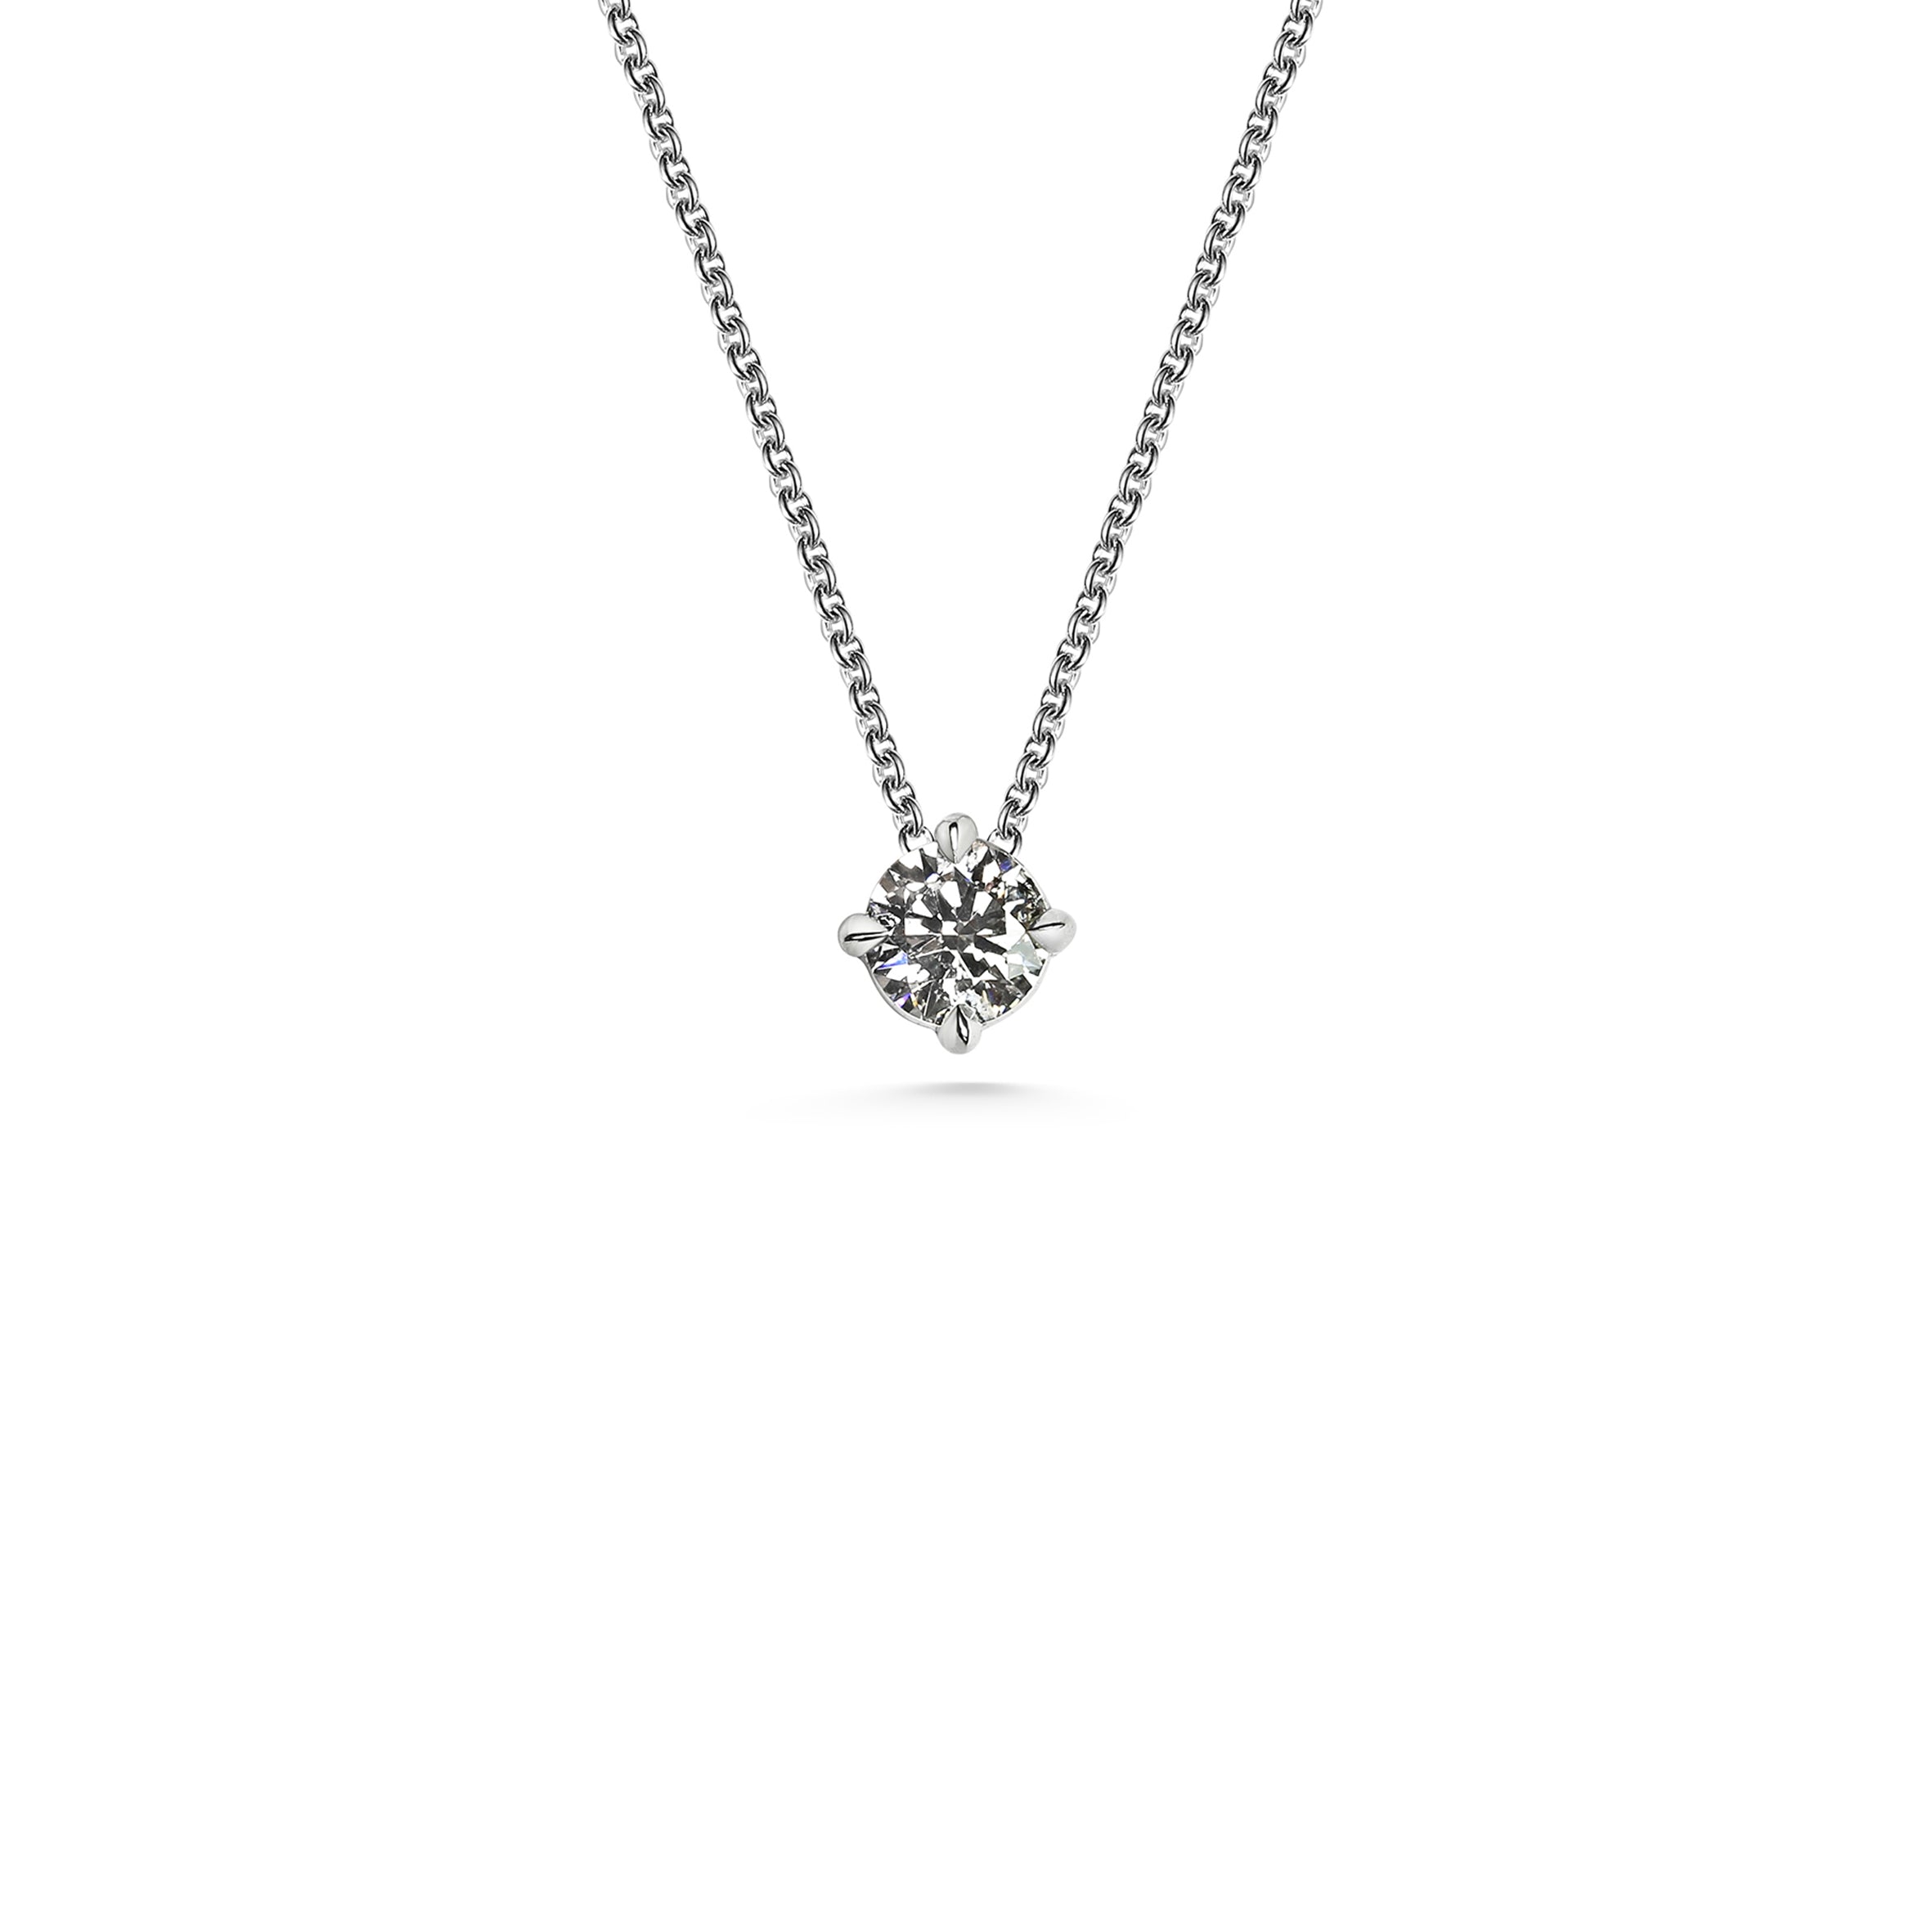 The 4mm White Diamond Slider Necklace by East London jeweller Rachel Boston | Discover our collections of unique and timeless engagement rings, wedding rings, and modern fine jewellery.